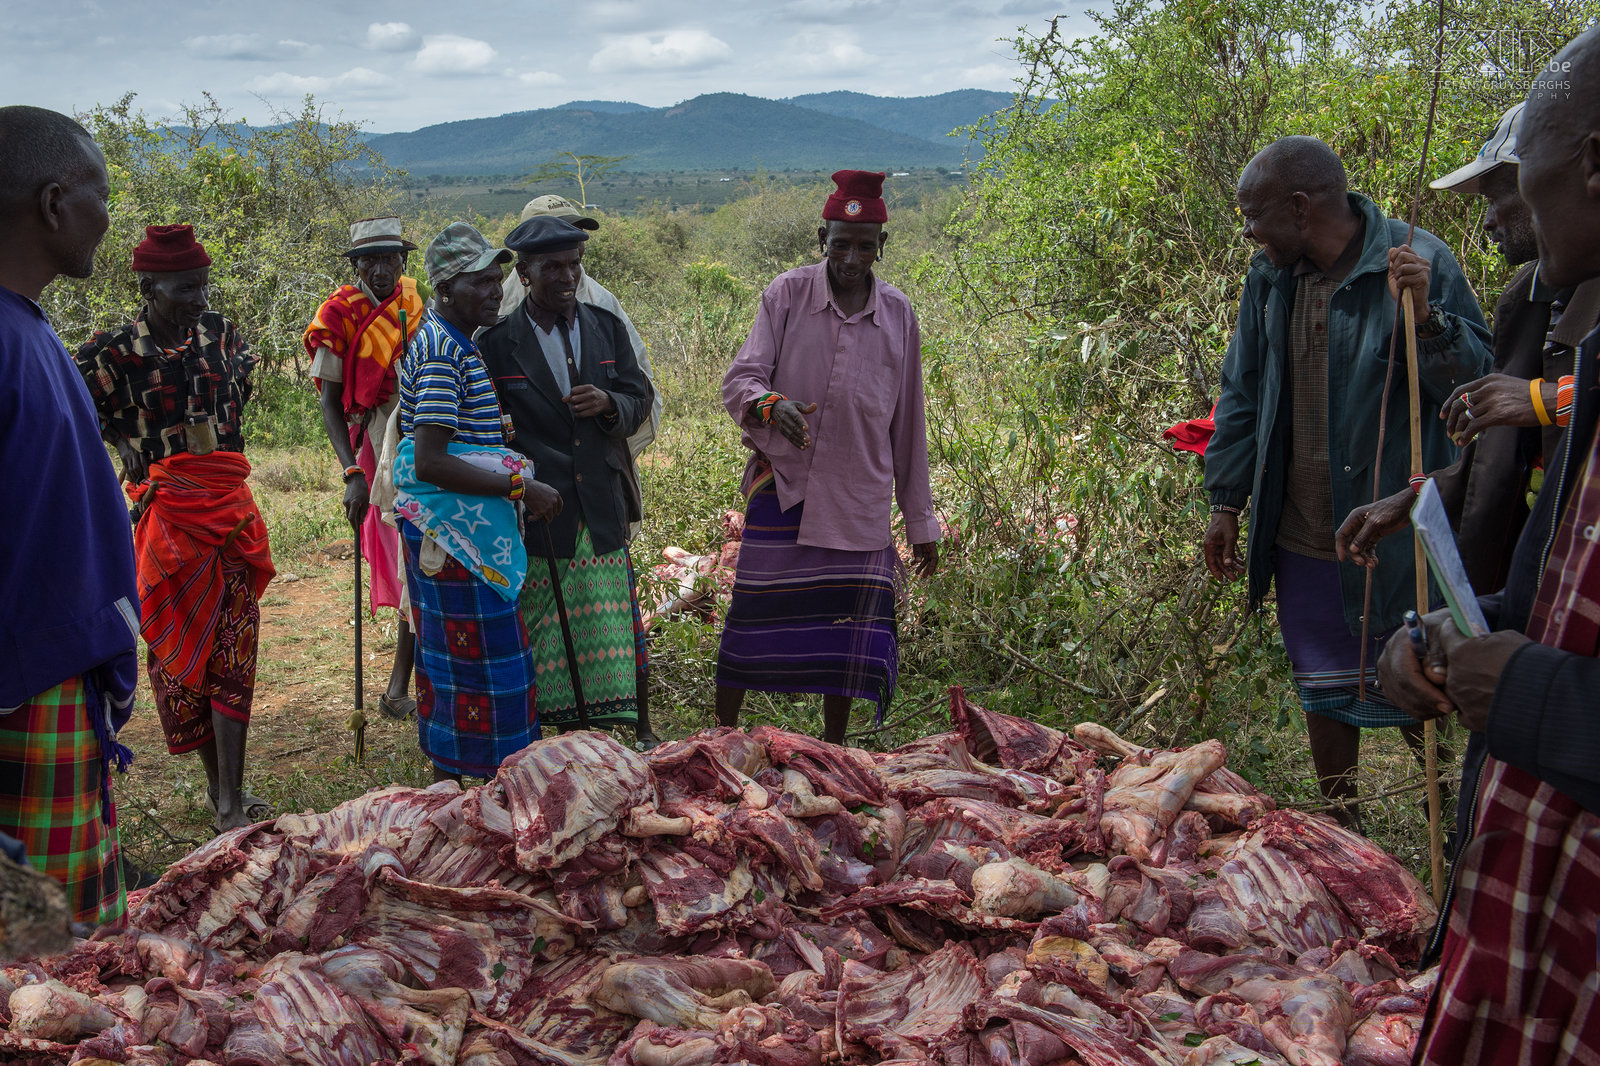 Kisima - Samburu lmuget - Mzee with meat collection All meat is collected by the mzee (older men) and they divide it between themselves, the morans (warriors) and the women and children. Stefan Cruysberghs